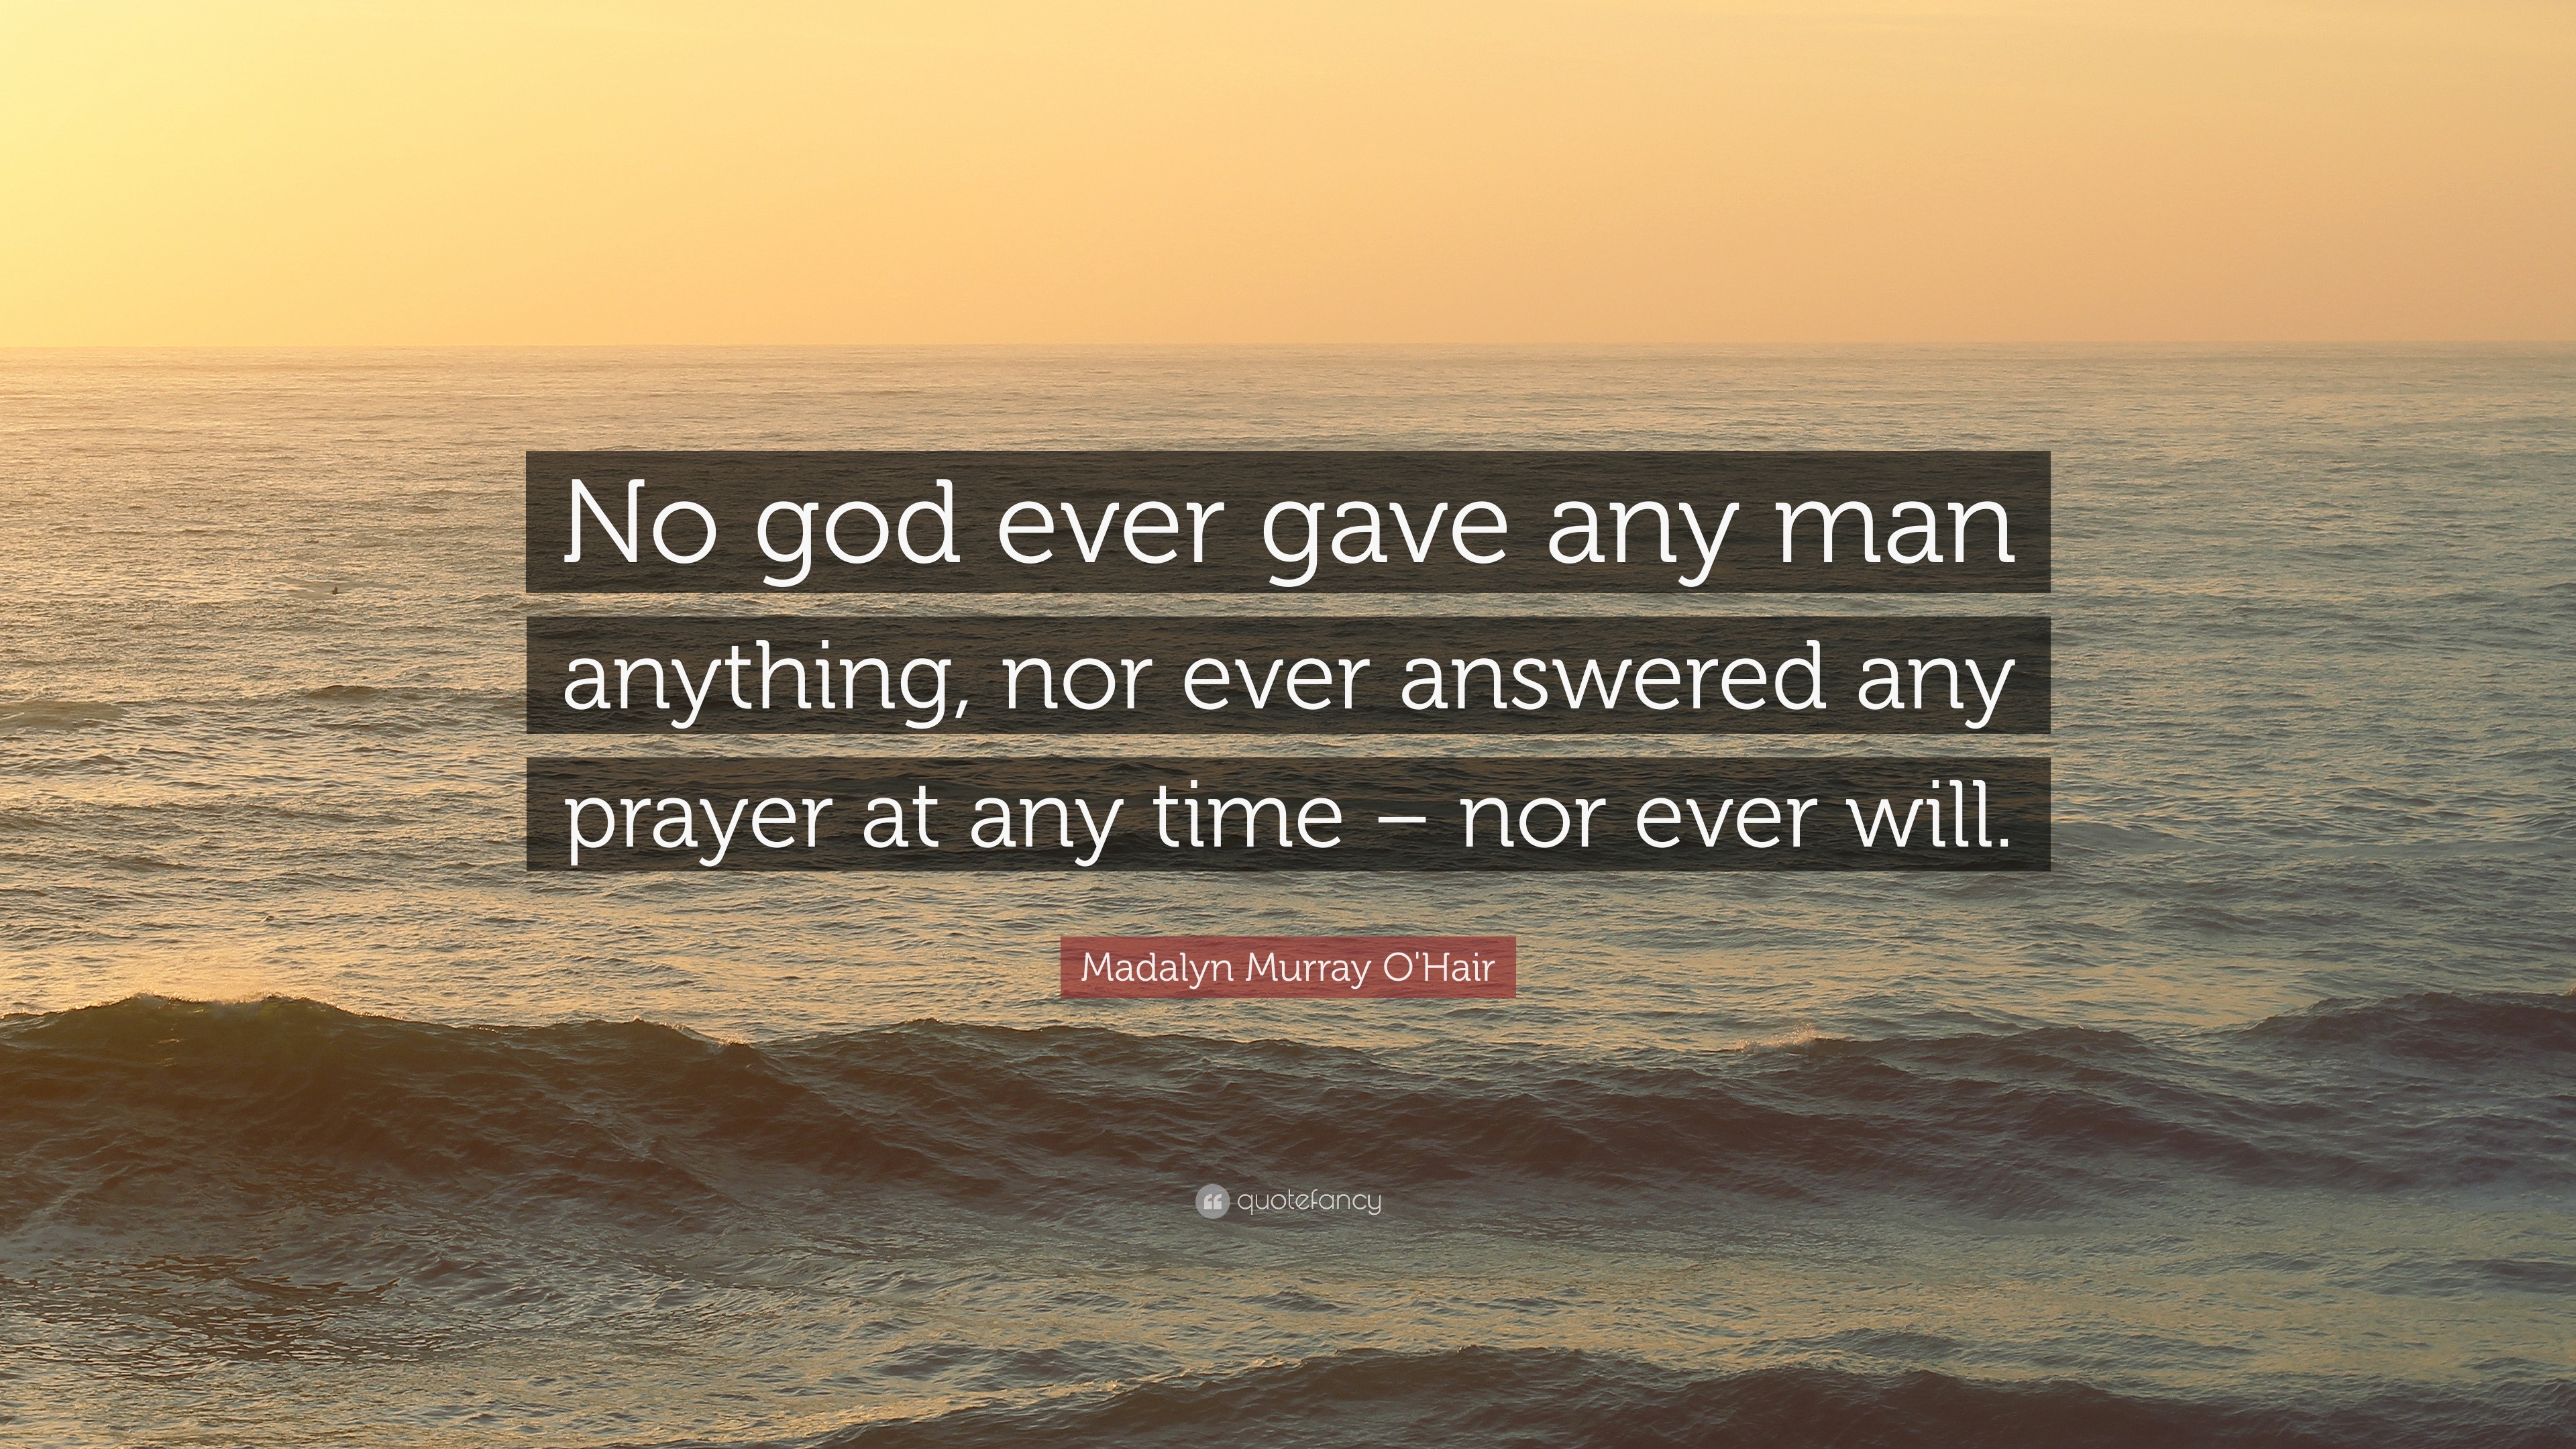 Madalyn Murray O'Hair Quote: “No god ever gave any man anything, nor ever  answered any